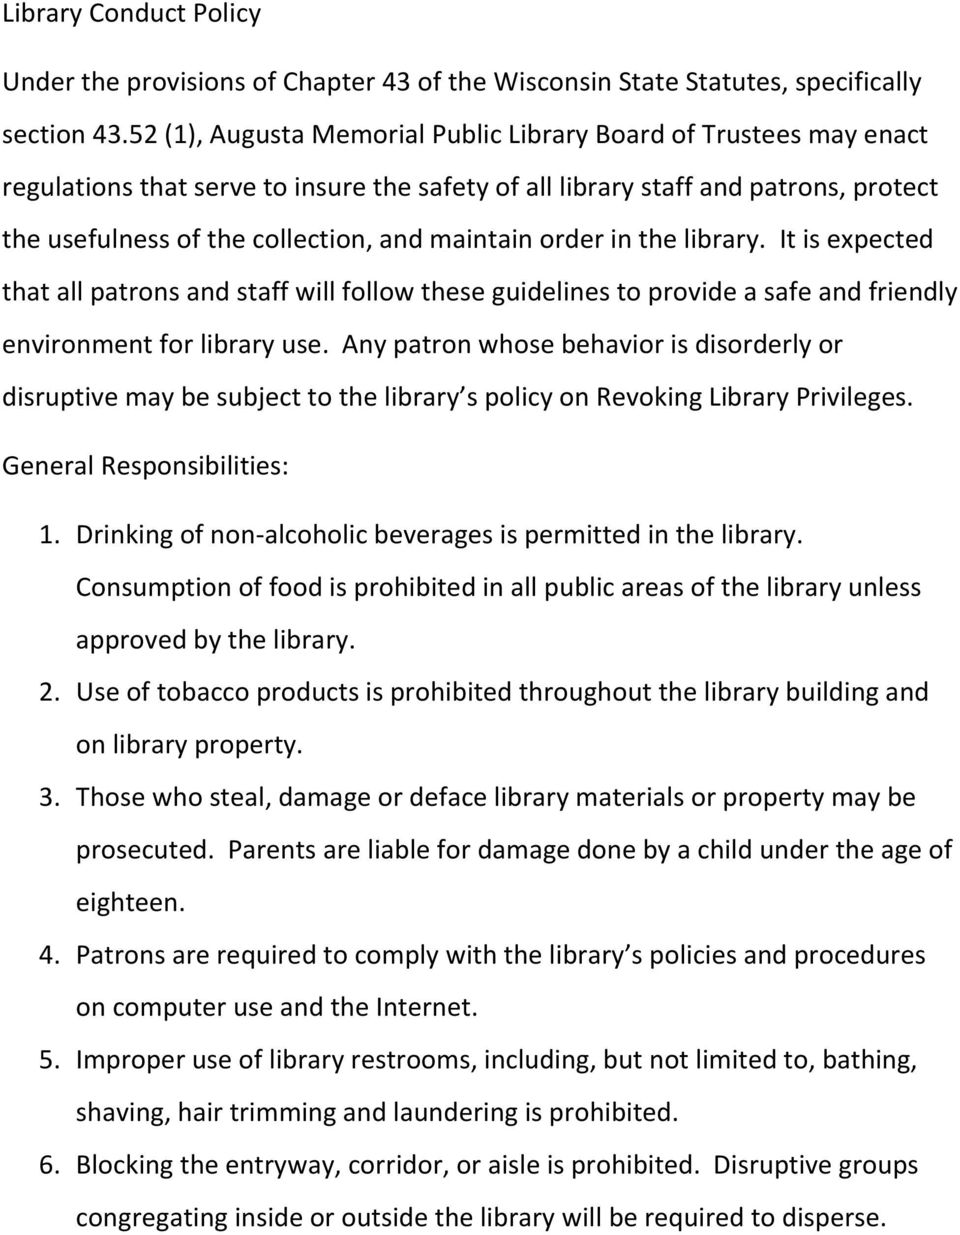 maintain order in the library. It is expected that all patrons and staff will follow these guidelines to provide a safe and friendly environment for library use.